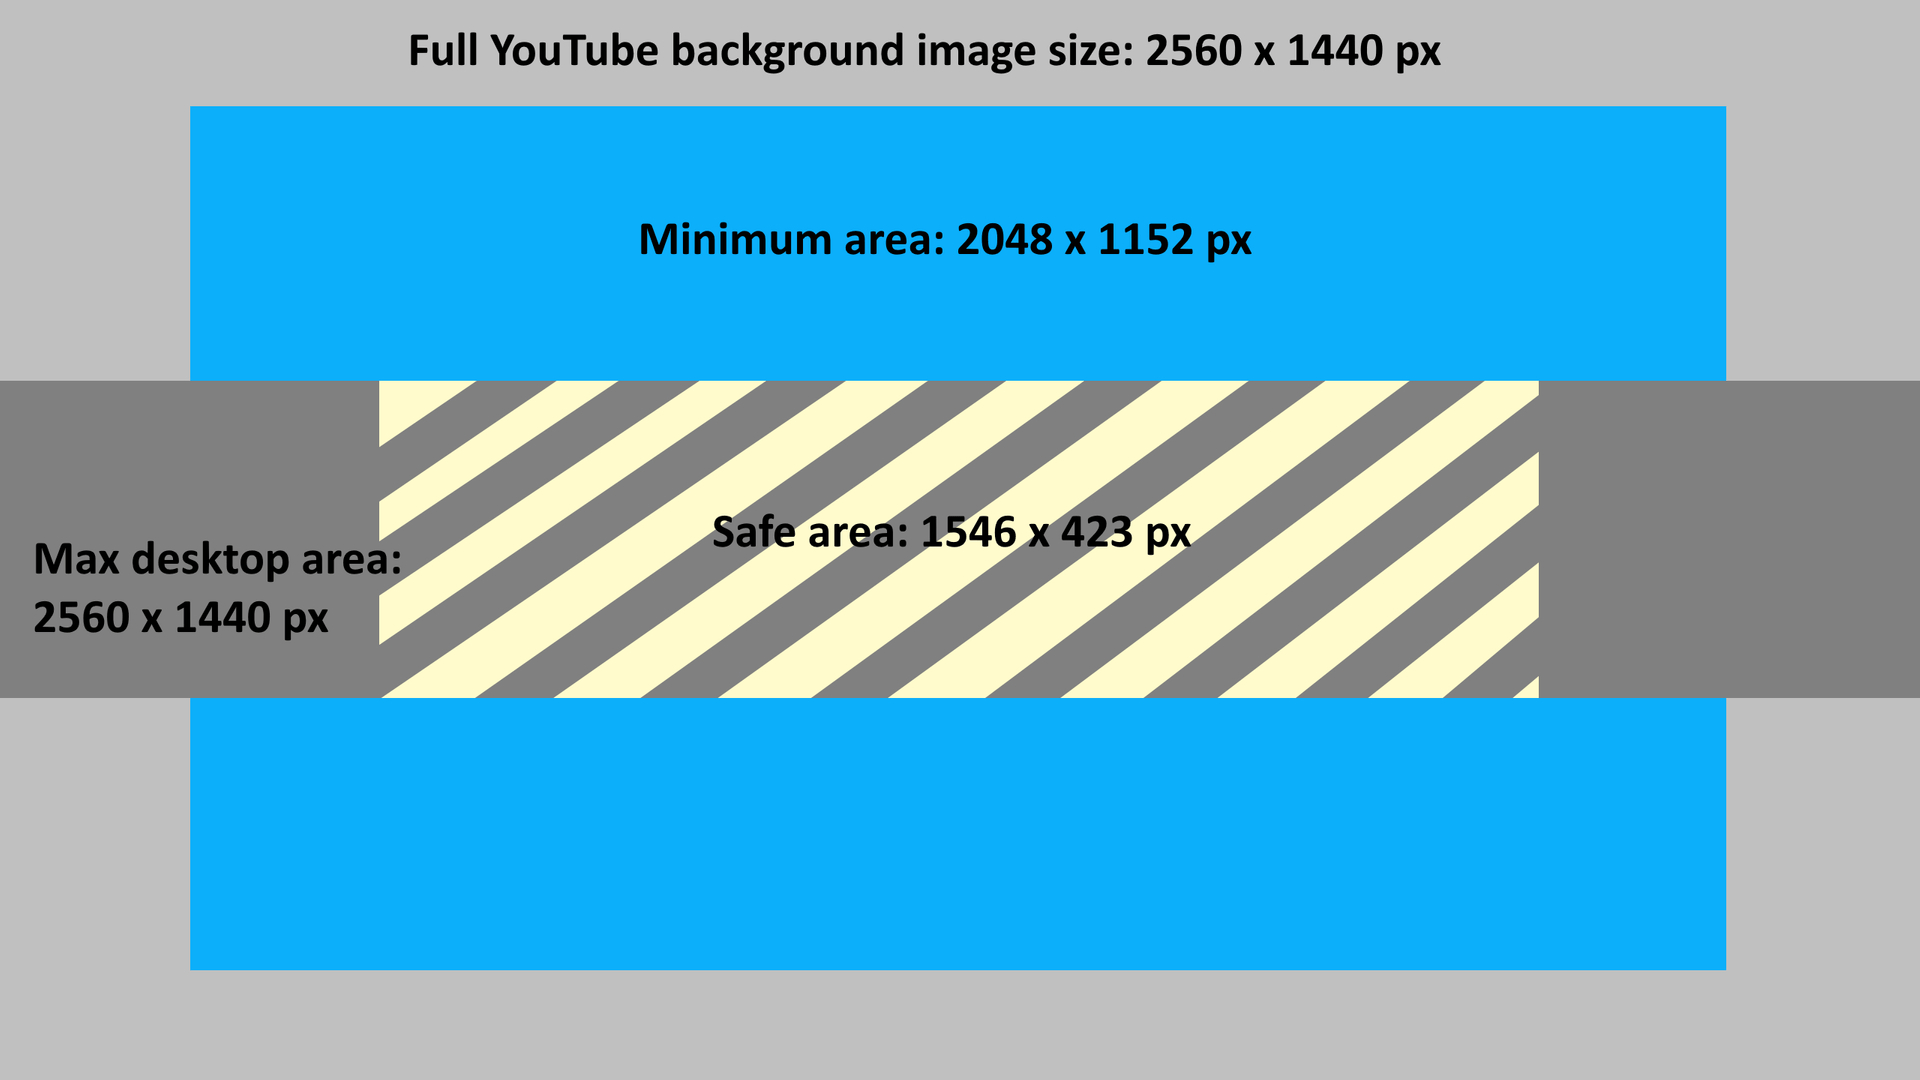 The Best Youtube Banner Size In 2020 + Best Practices For Intended For Youtube Banner Size Template